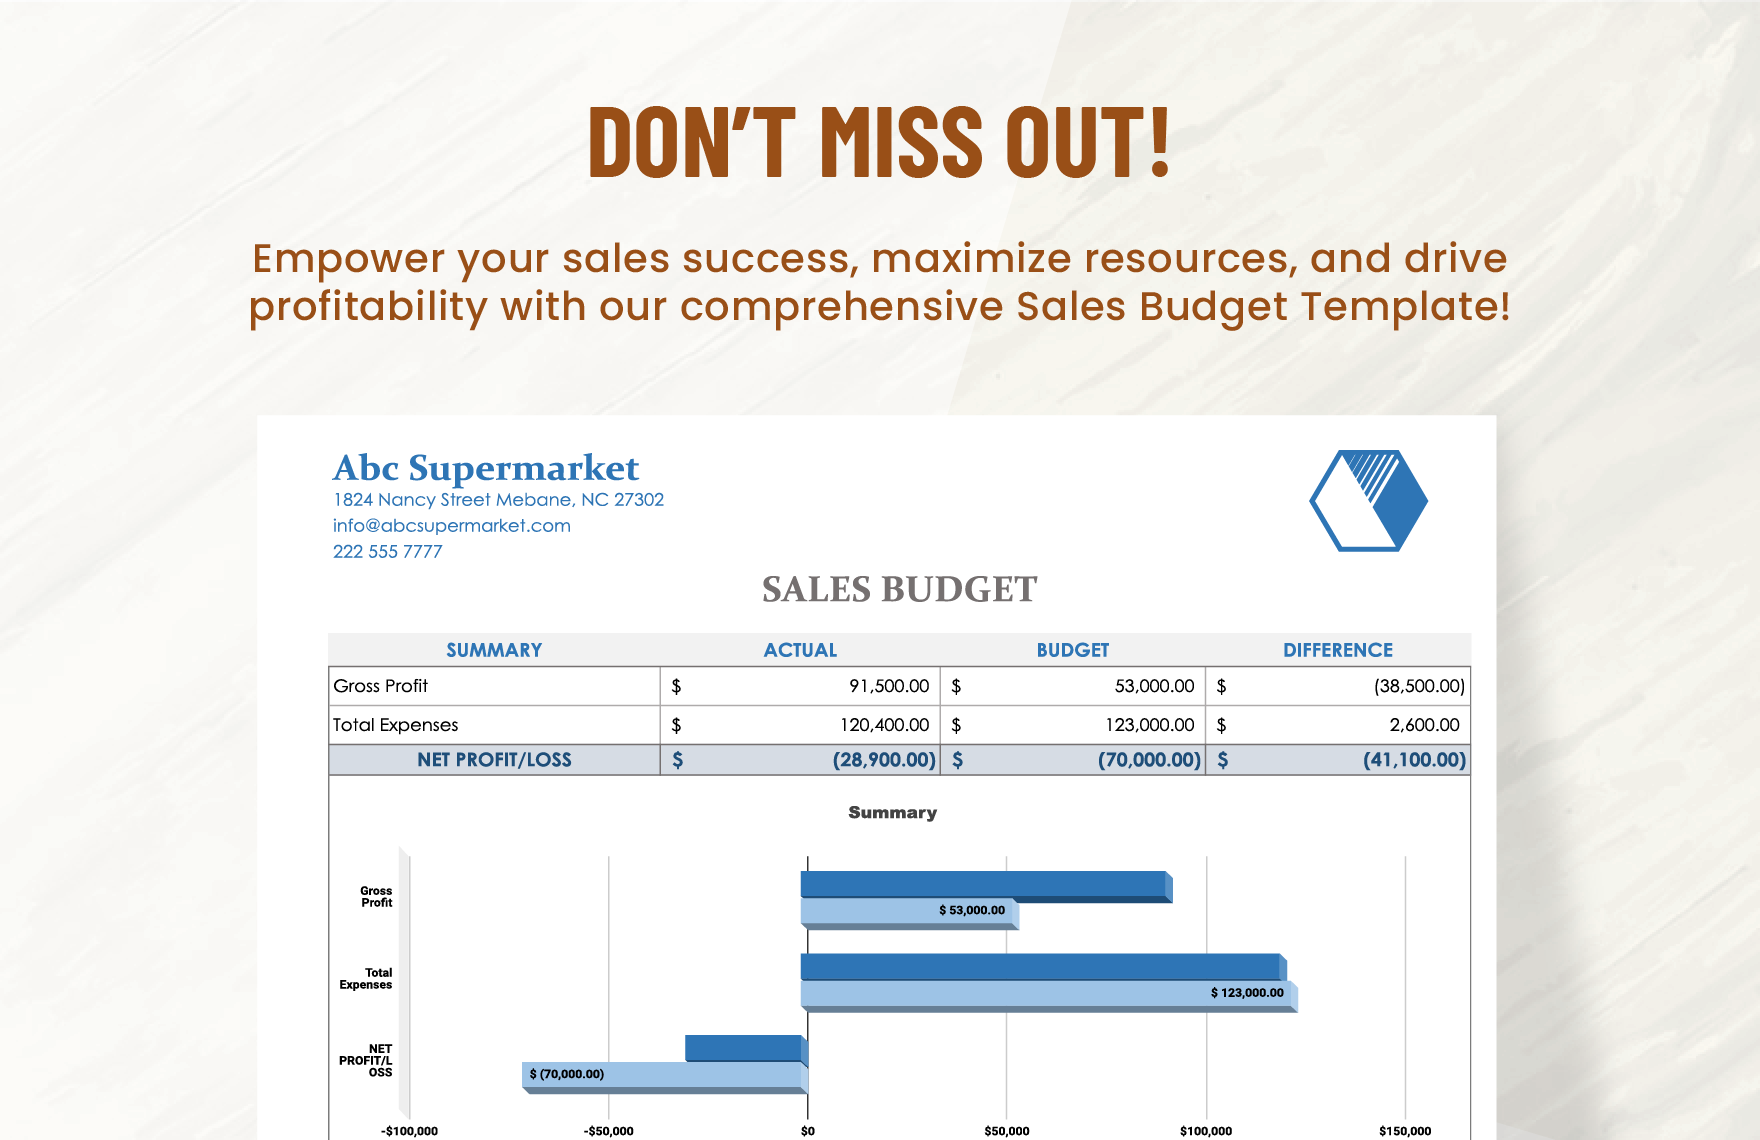 Sales Budget Template